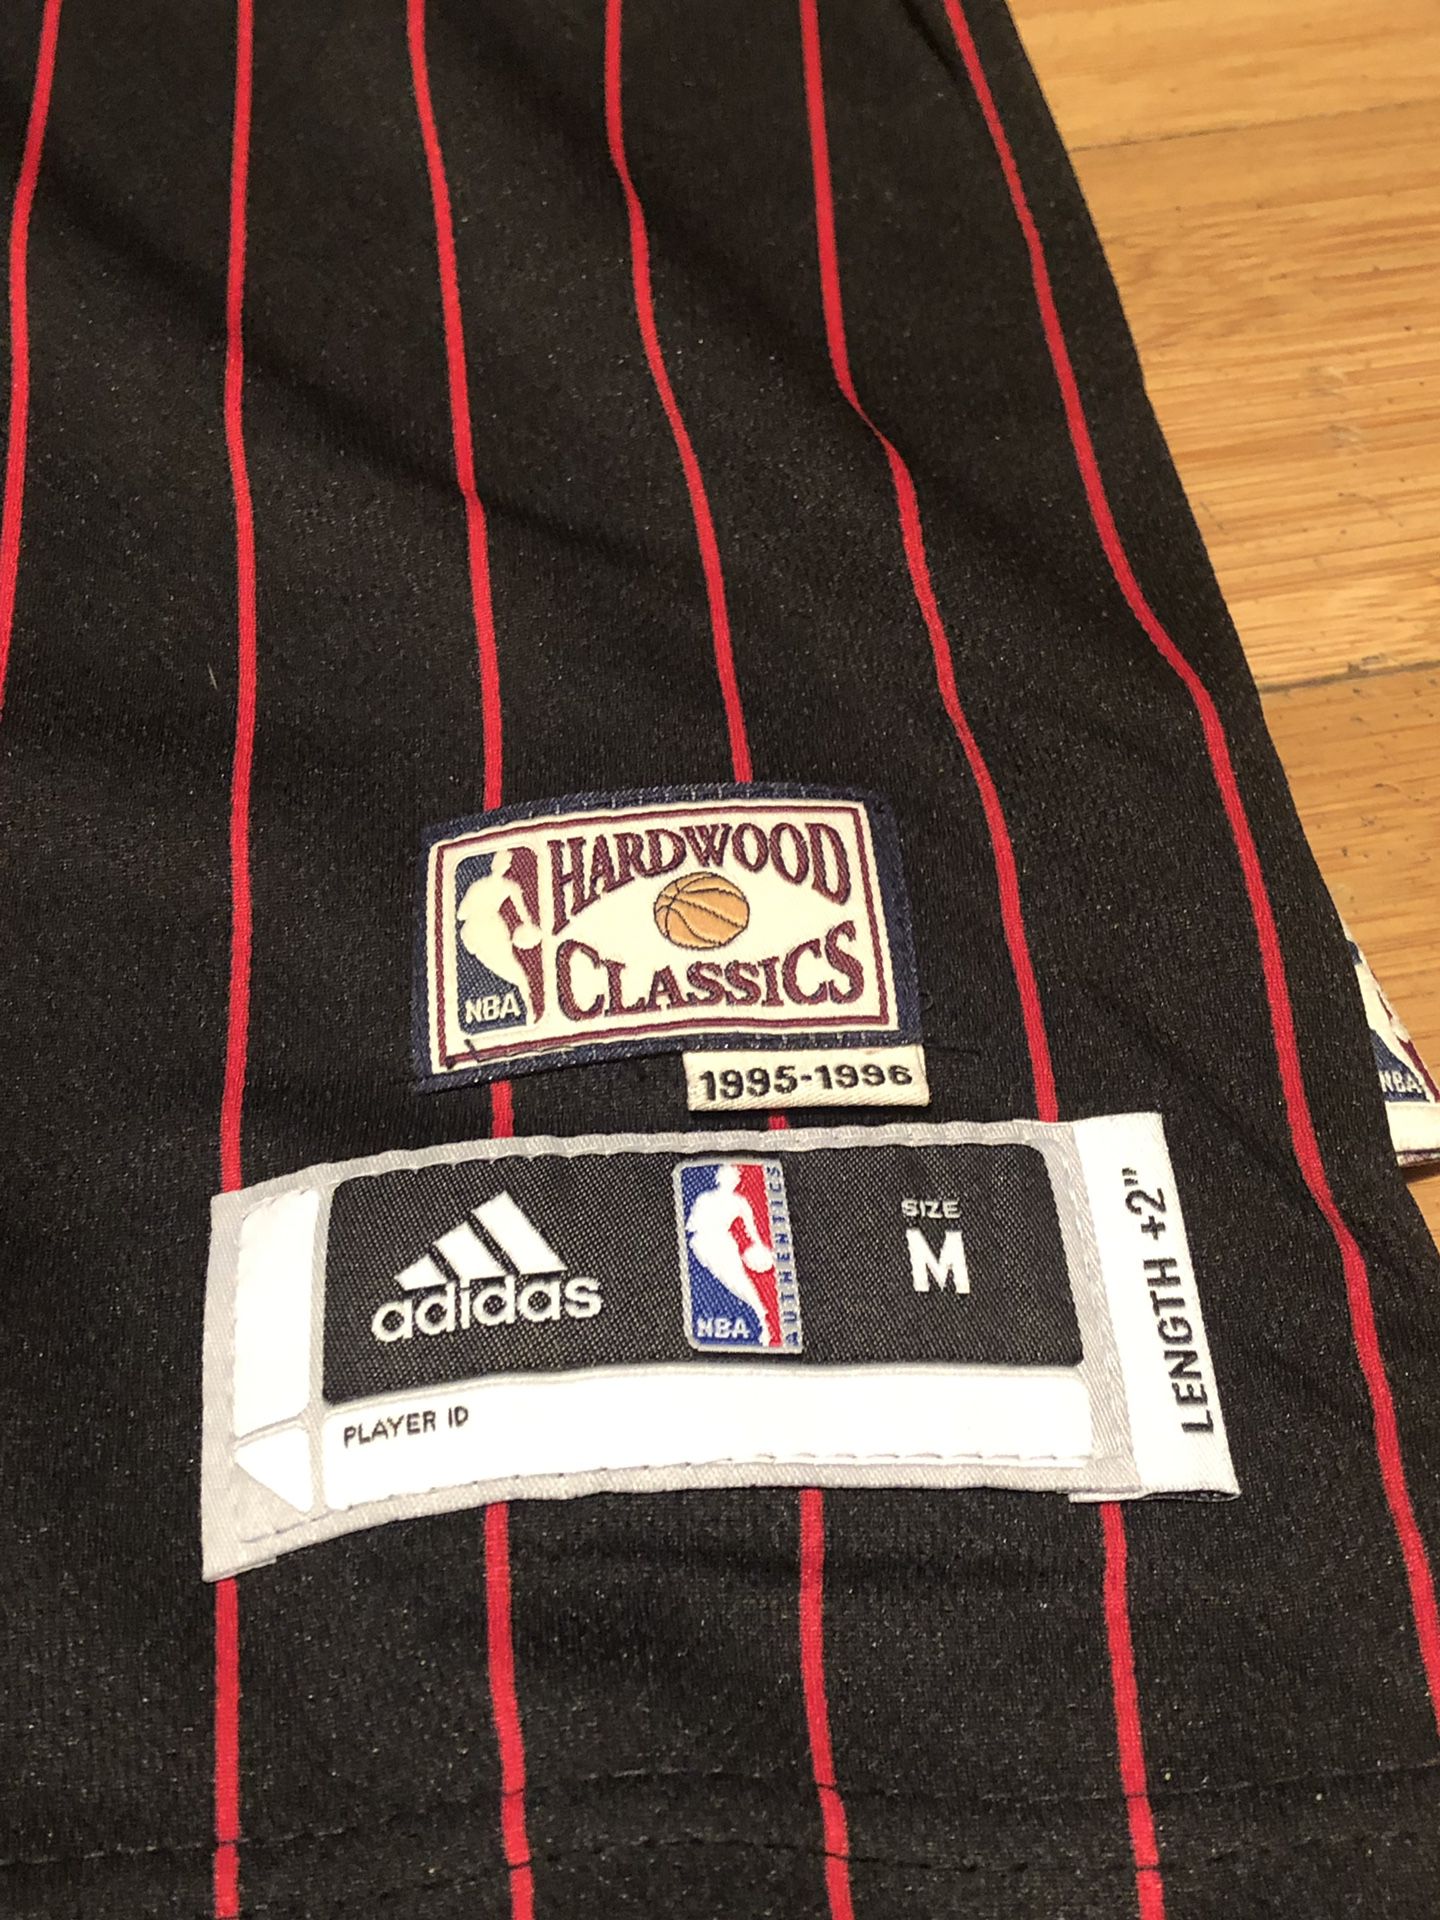 Bulls Rose Jersey for Sale in Glmn Hot Spgs, CA - OfferUp